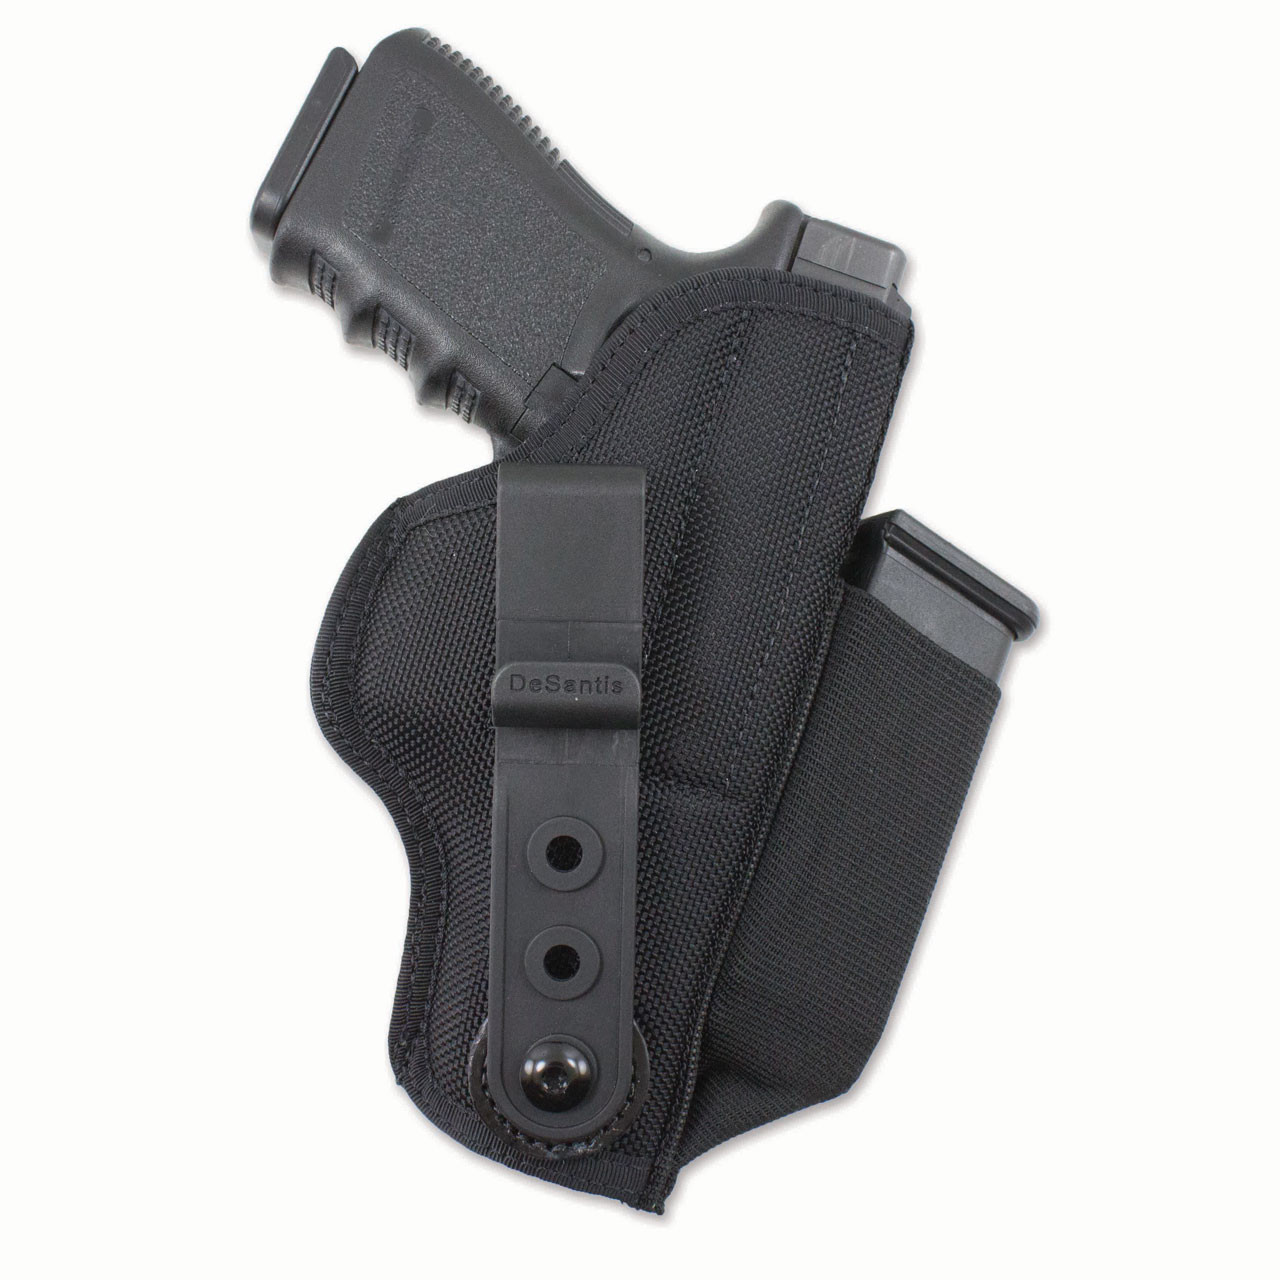 Details about   Pro-Tech Gun Holster plus Extra-Magazine Holder For Kahr P-380 with Laser 